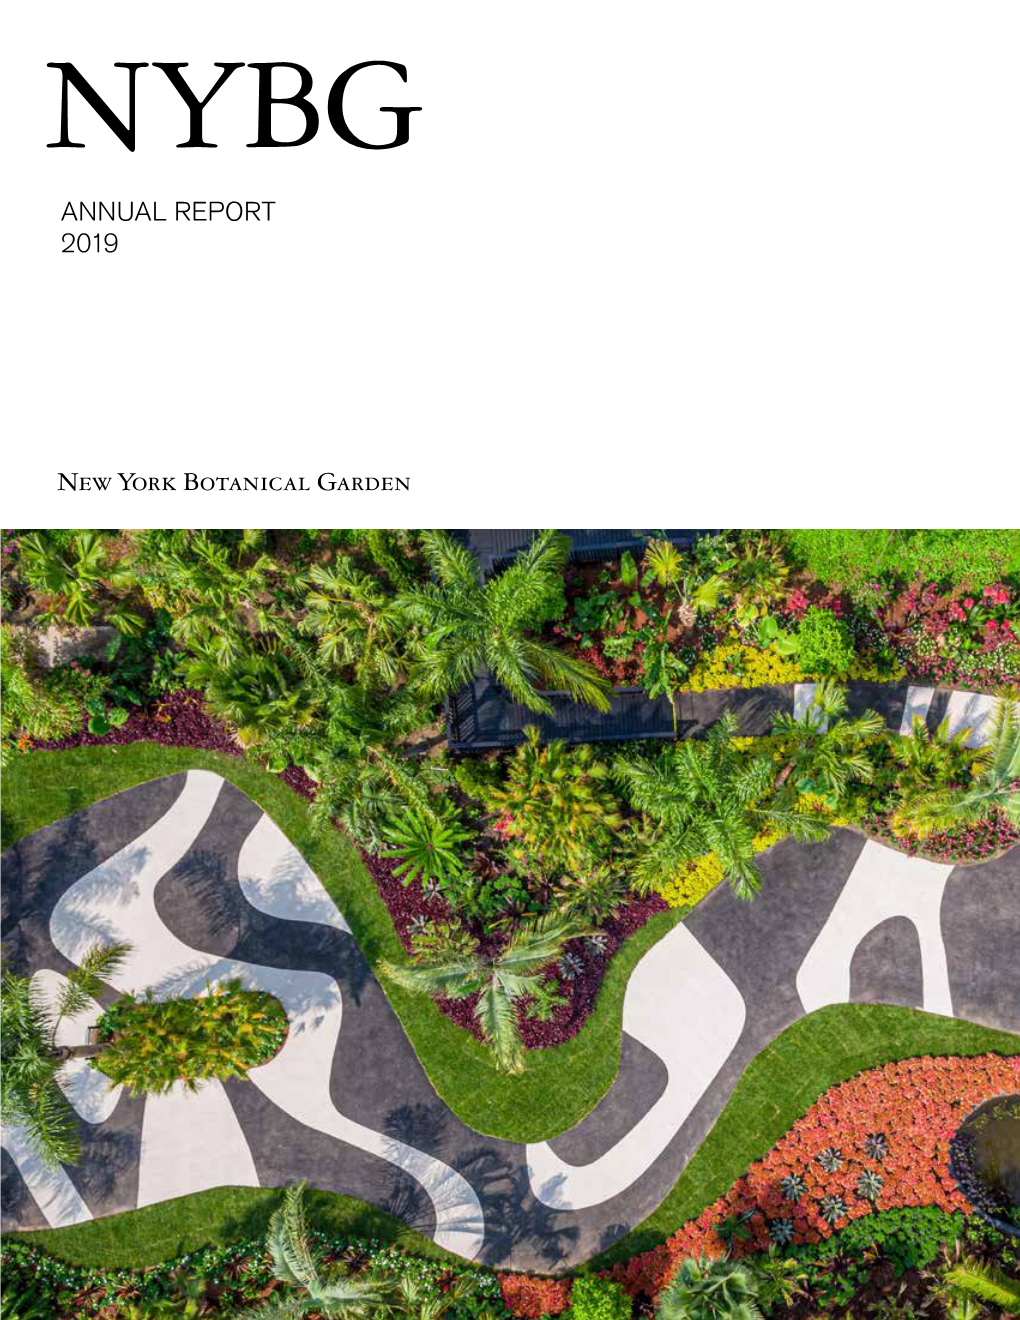 NYBG 2019 Annual Report